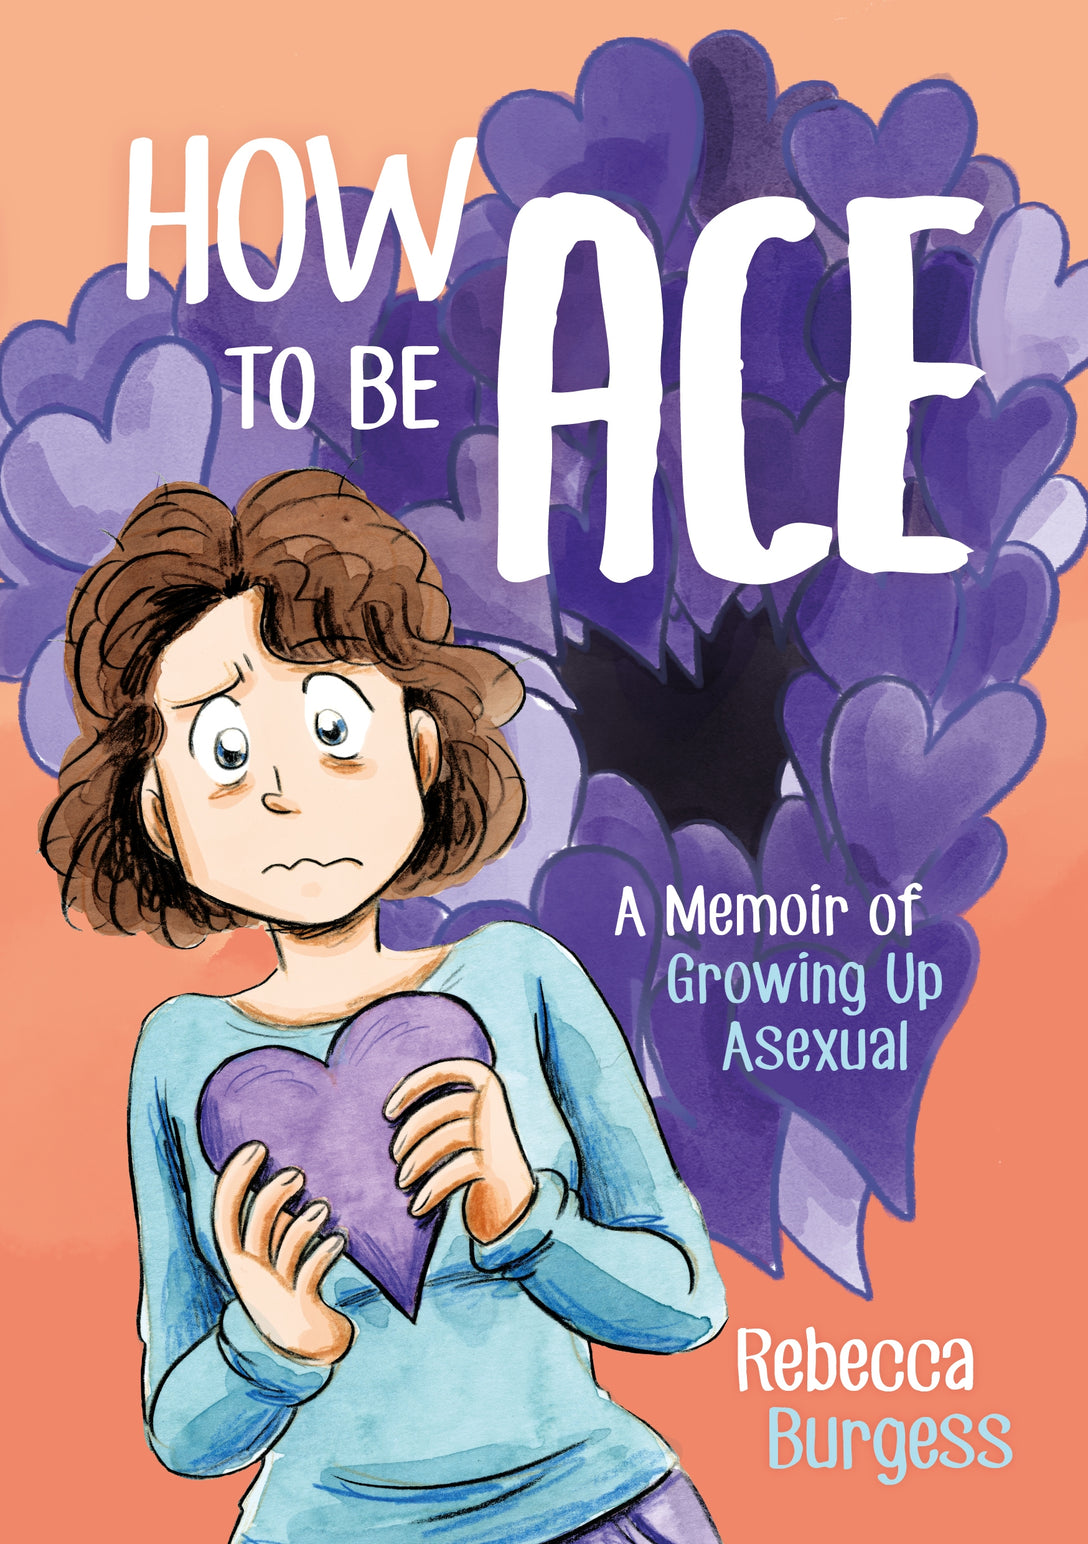 How to Be Ace by Rebecca Burgess